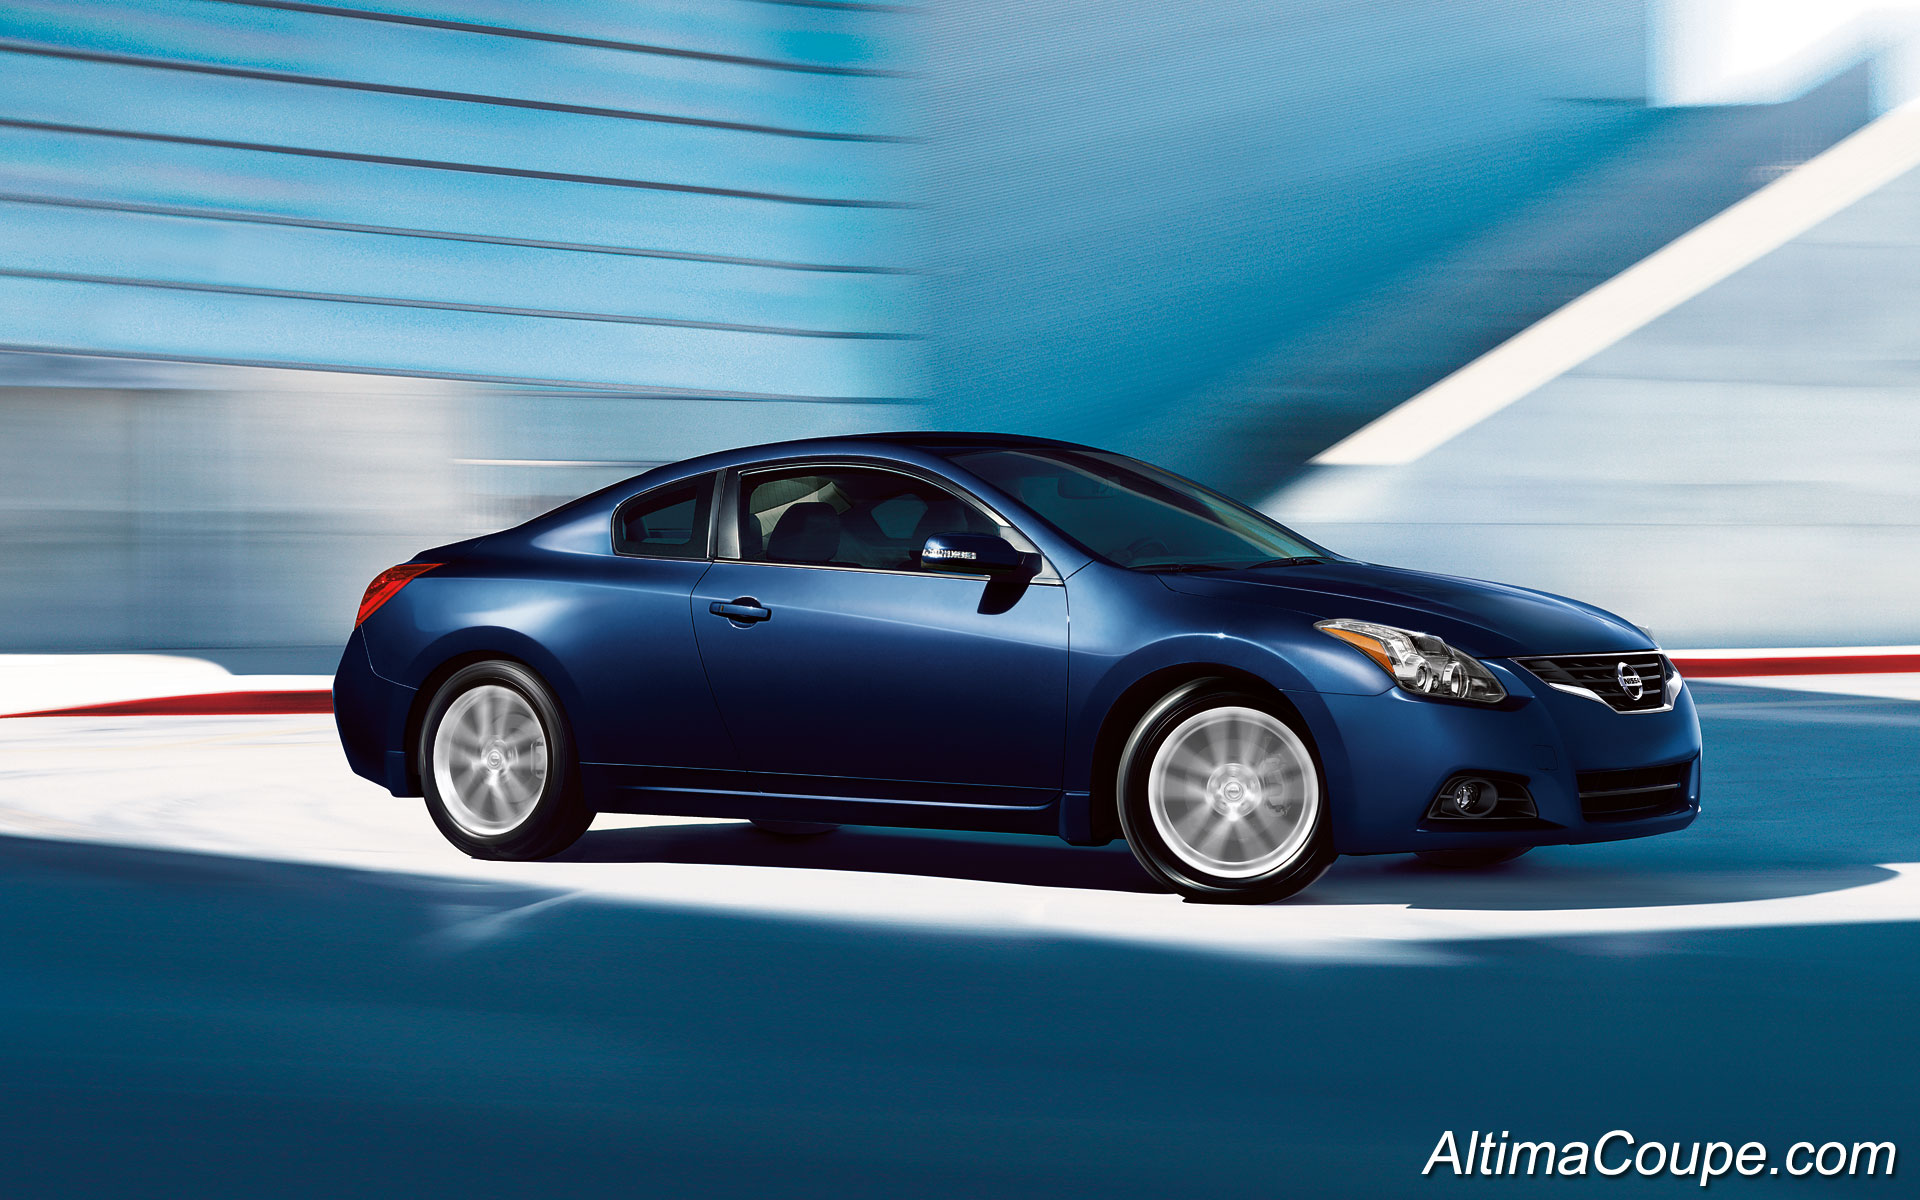 Nissan Altima Cou HD Wallpaper Background Image